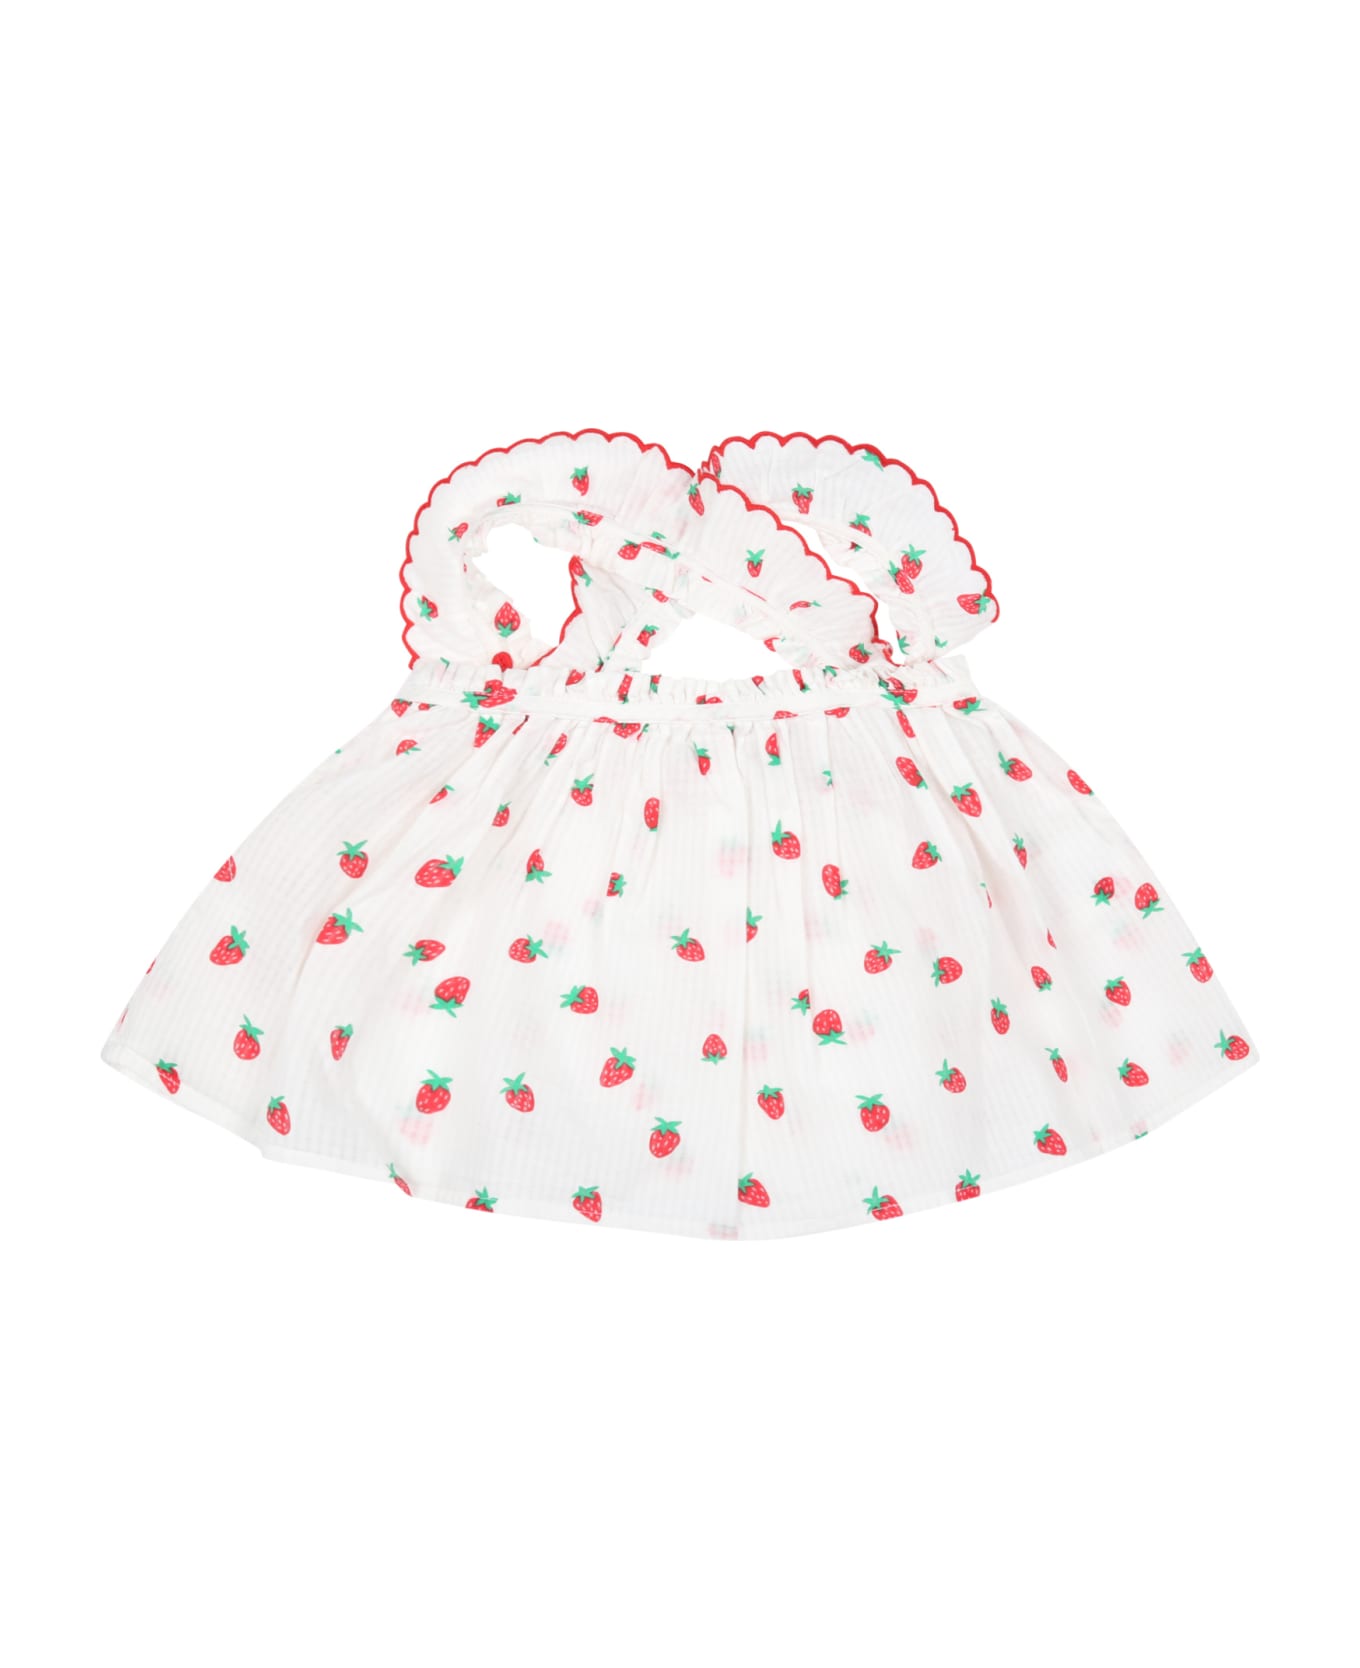 Stella McCartney Kids White Suit For Baby Girl With Red Strawberries - Bianco